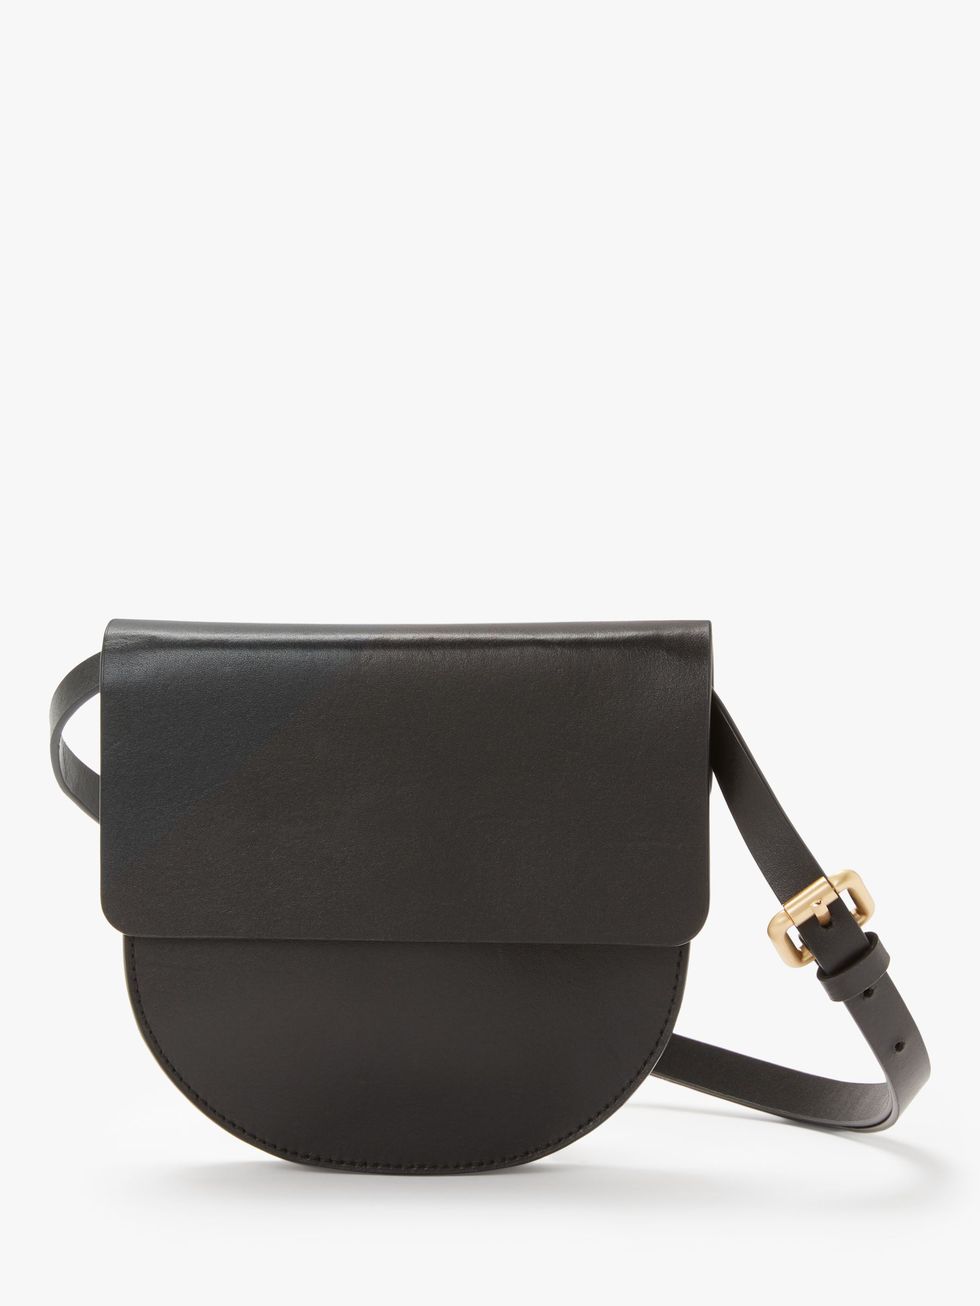 John Lewis & Partners is selling the perfect £40 cross-body bag for spring